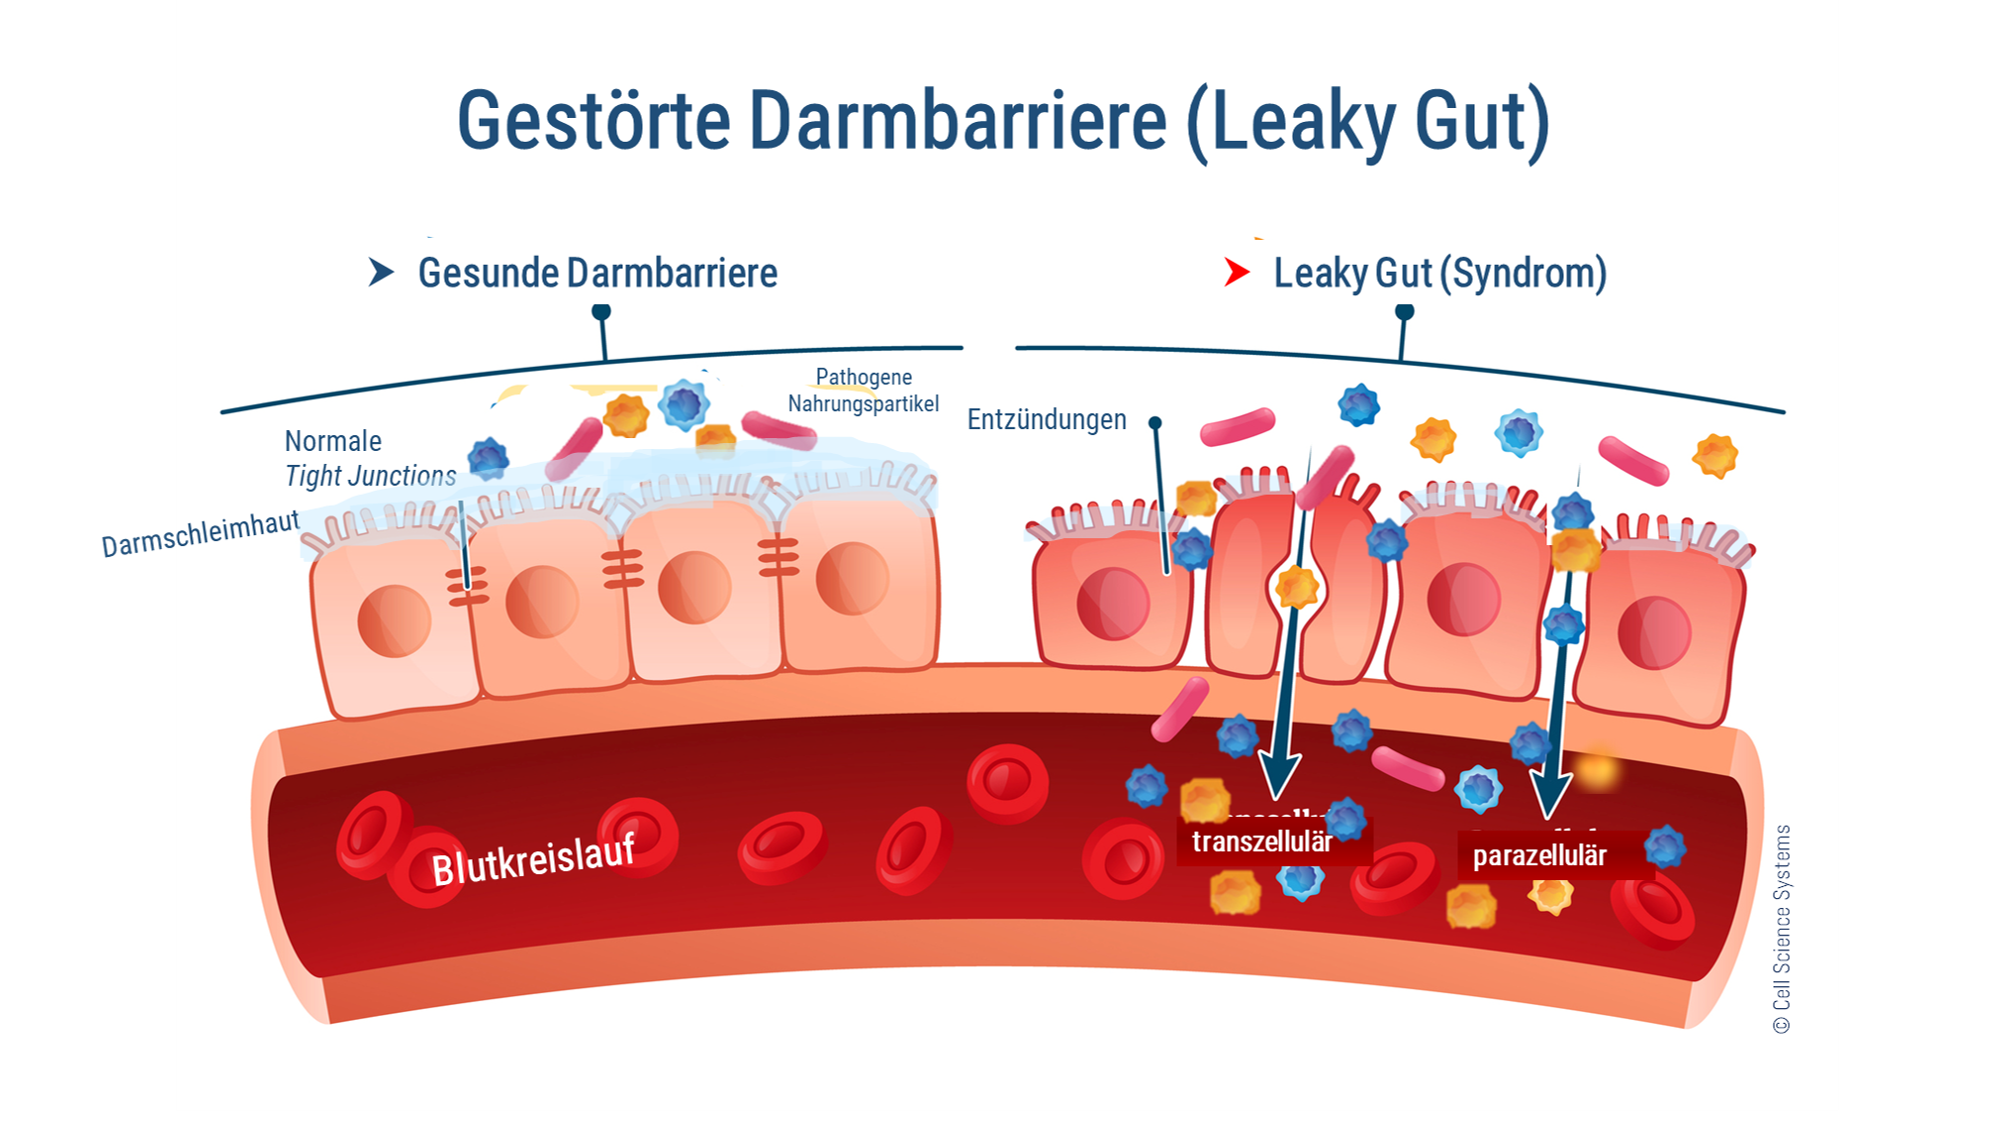 So entsteht Leaky Gut bzw. Leaky Gut Syndrom